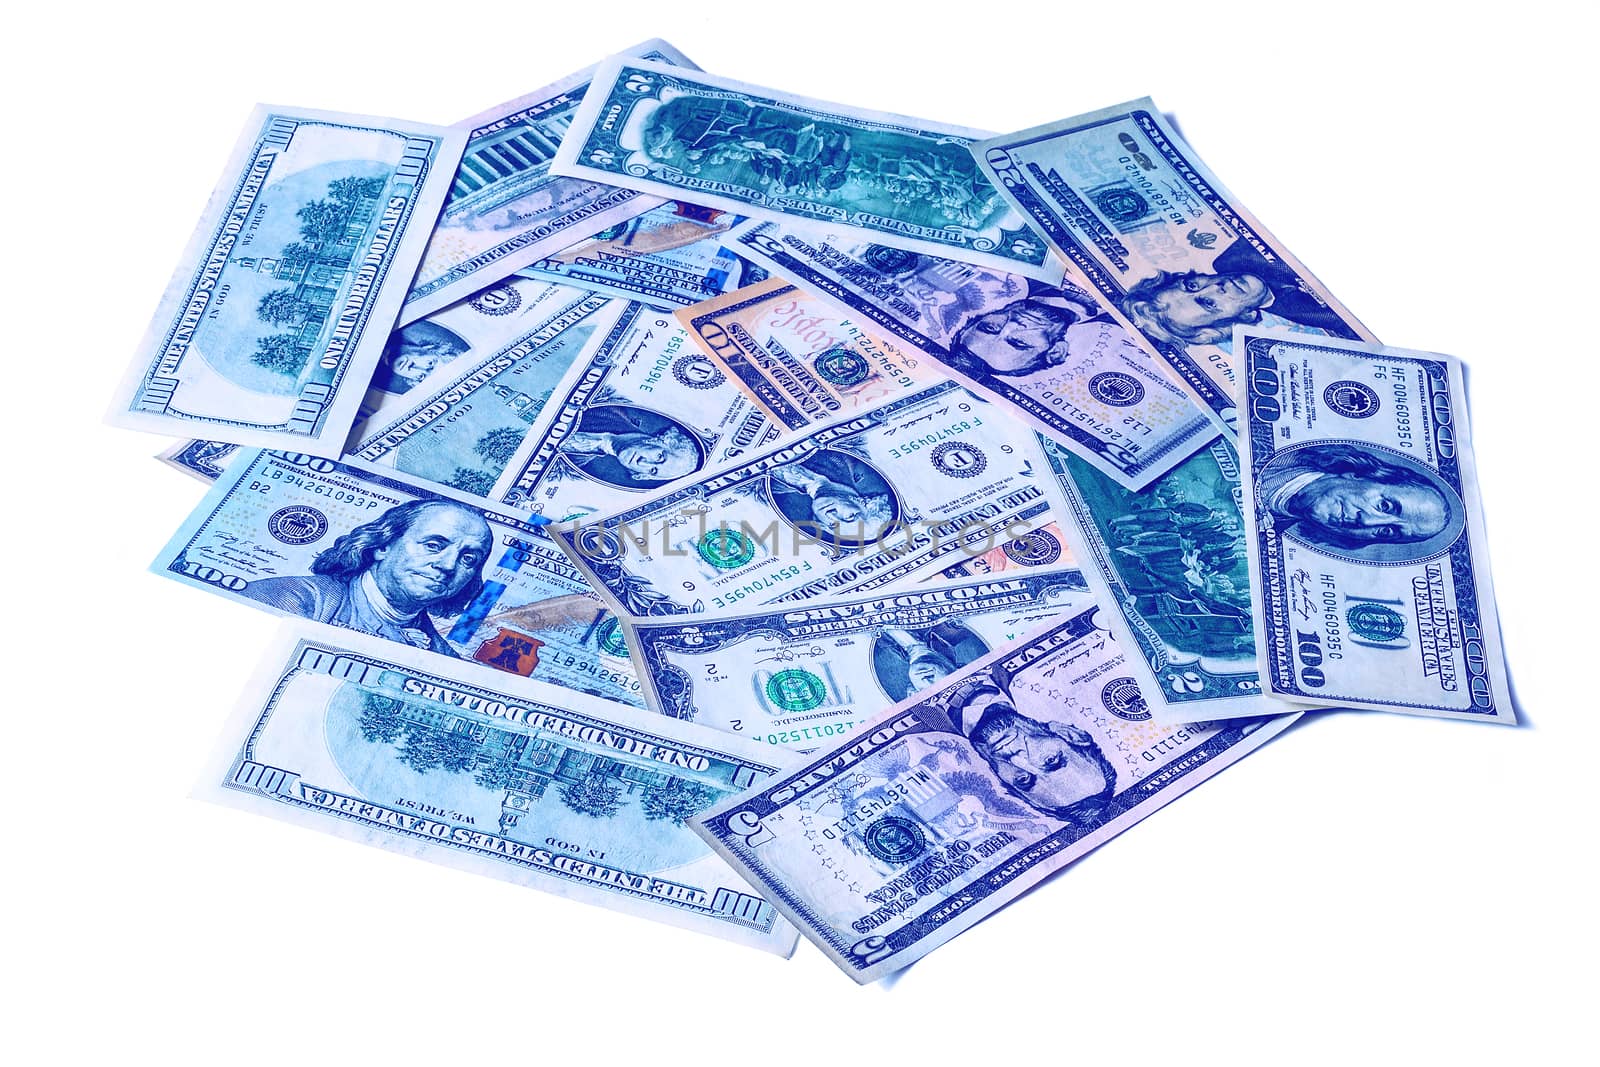 Background with money american dollar bills. Cash dollars isolated on a white.